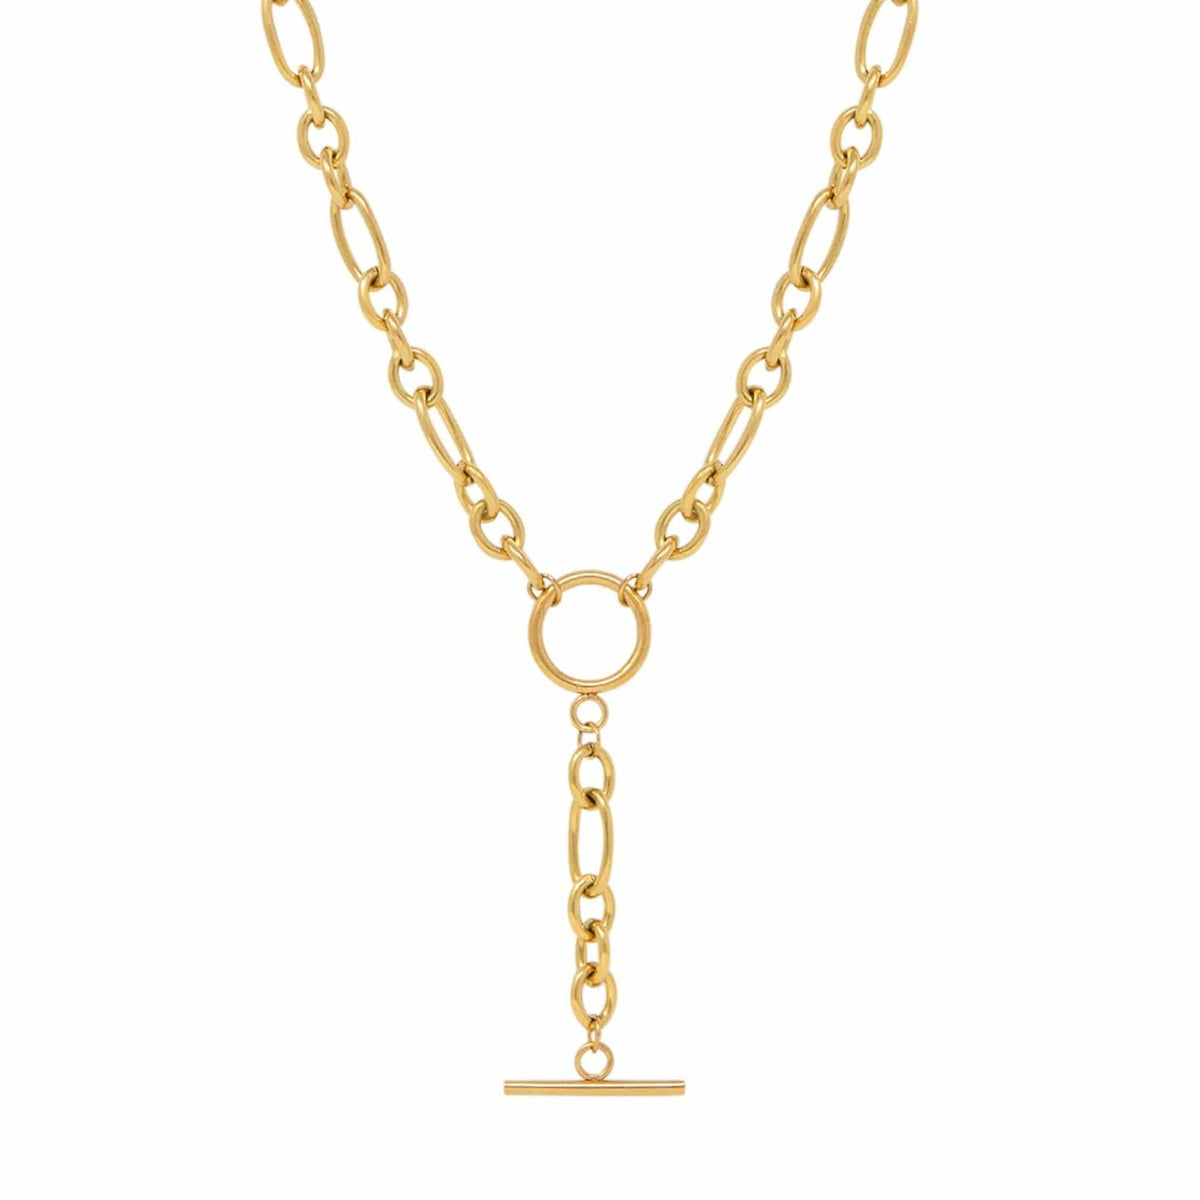 BohoMoon Stainless Steel Montana Tbar Necklace Gold